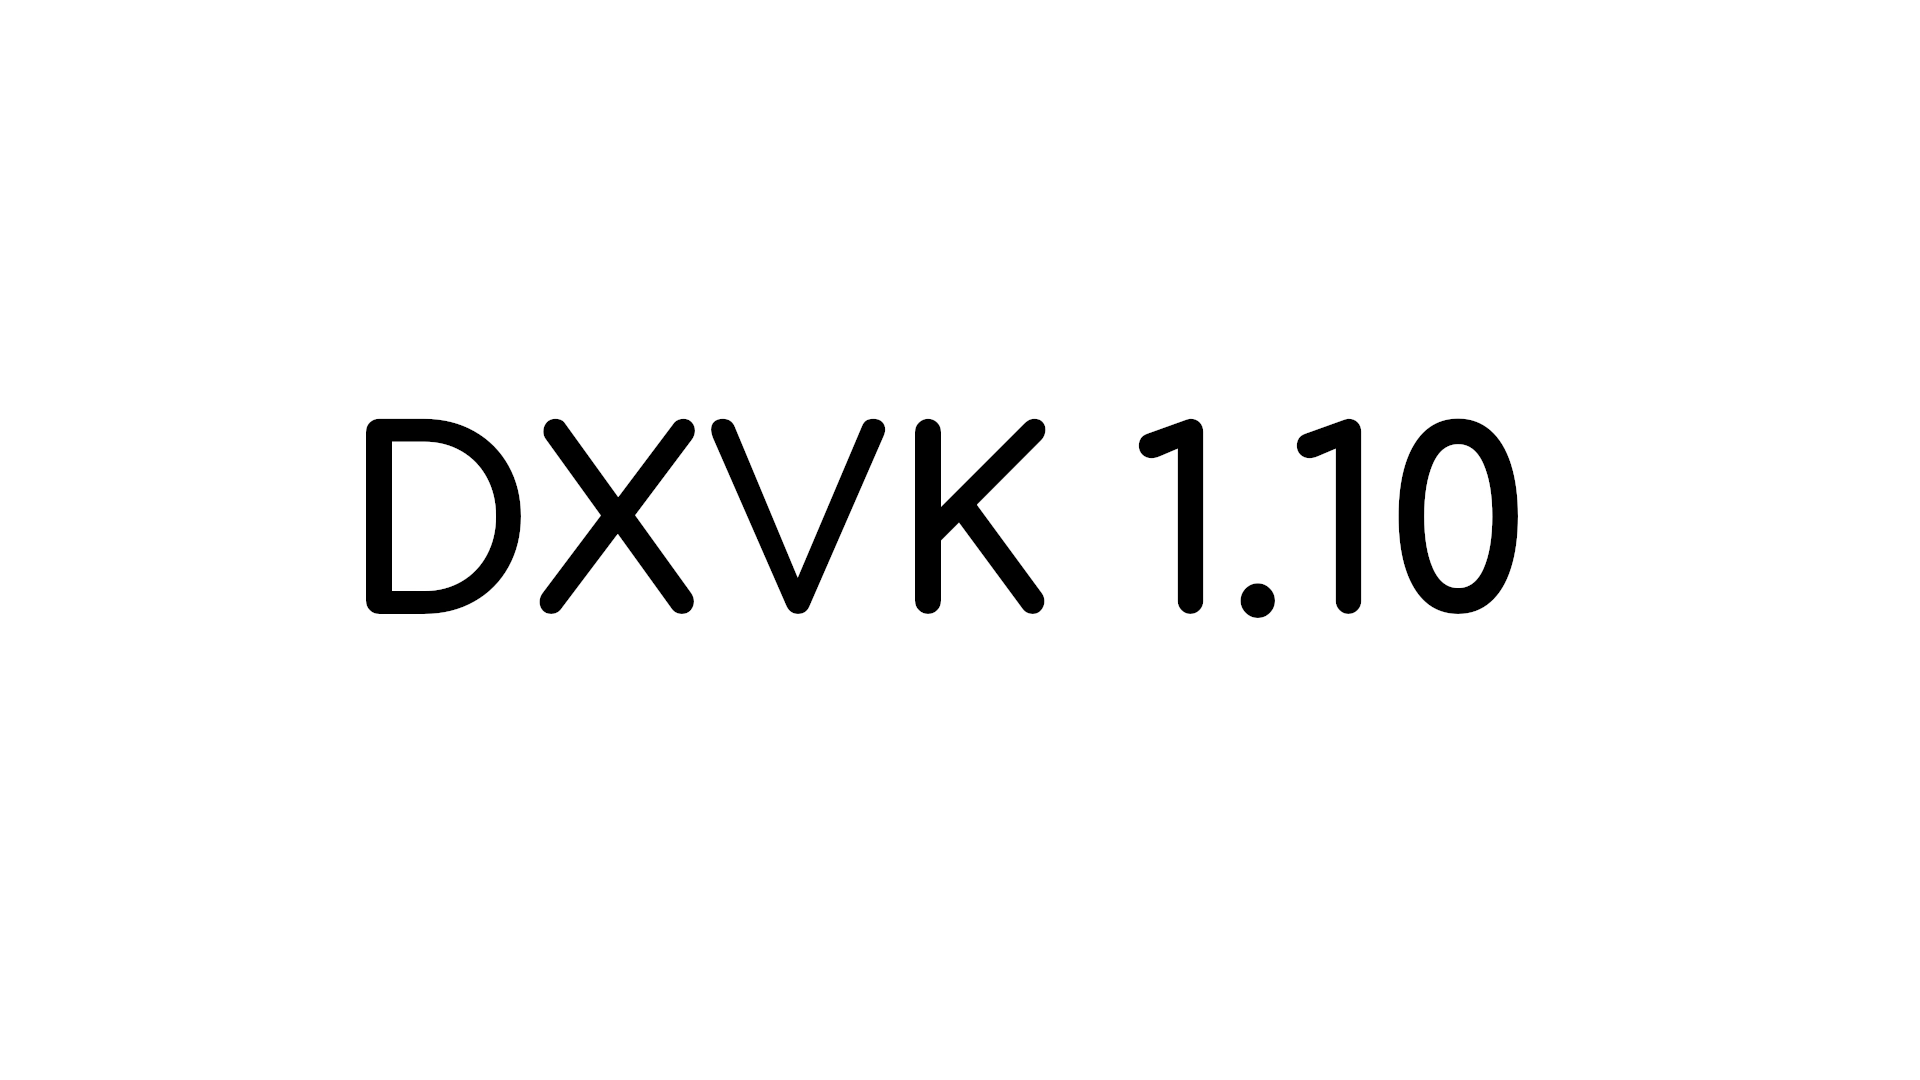 DXVK 1.10 Adds More Improvements for God of War, GTA IV, Quantum Break, and Other Games